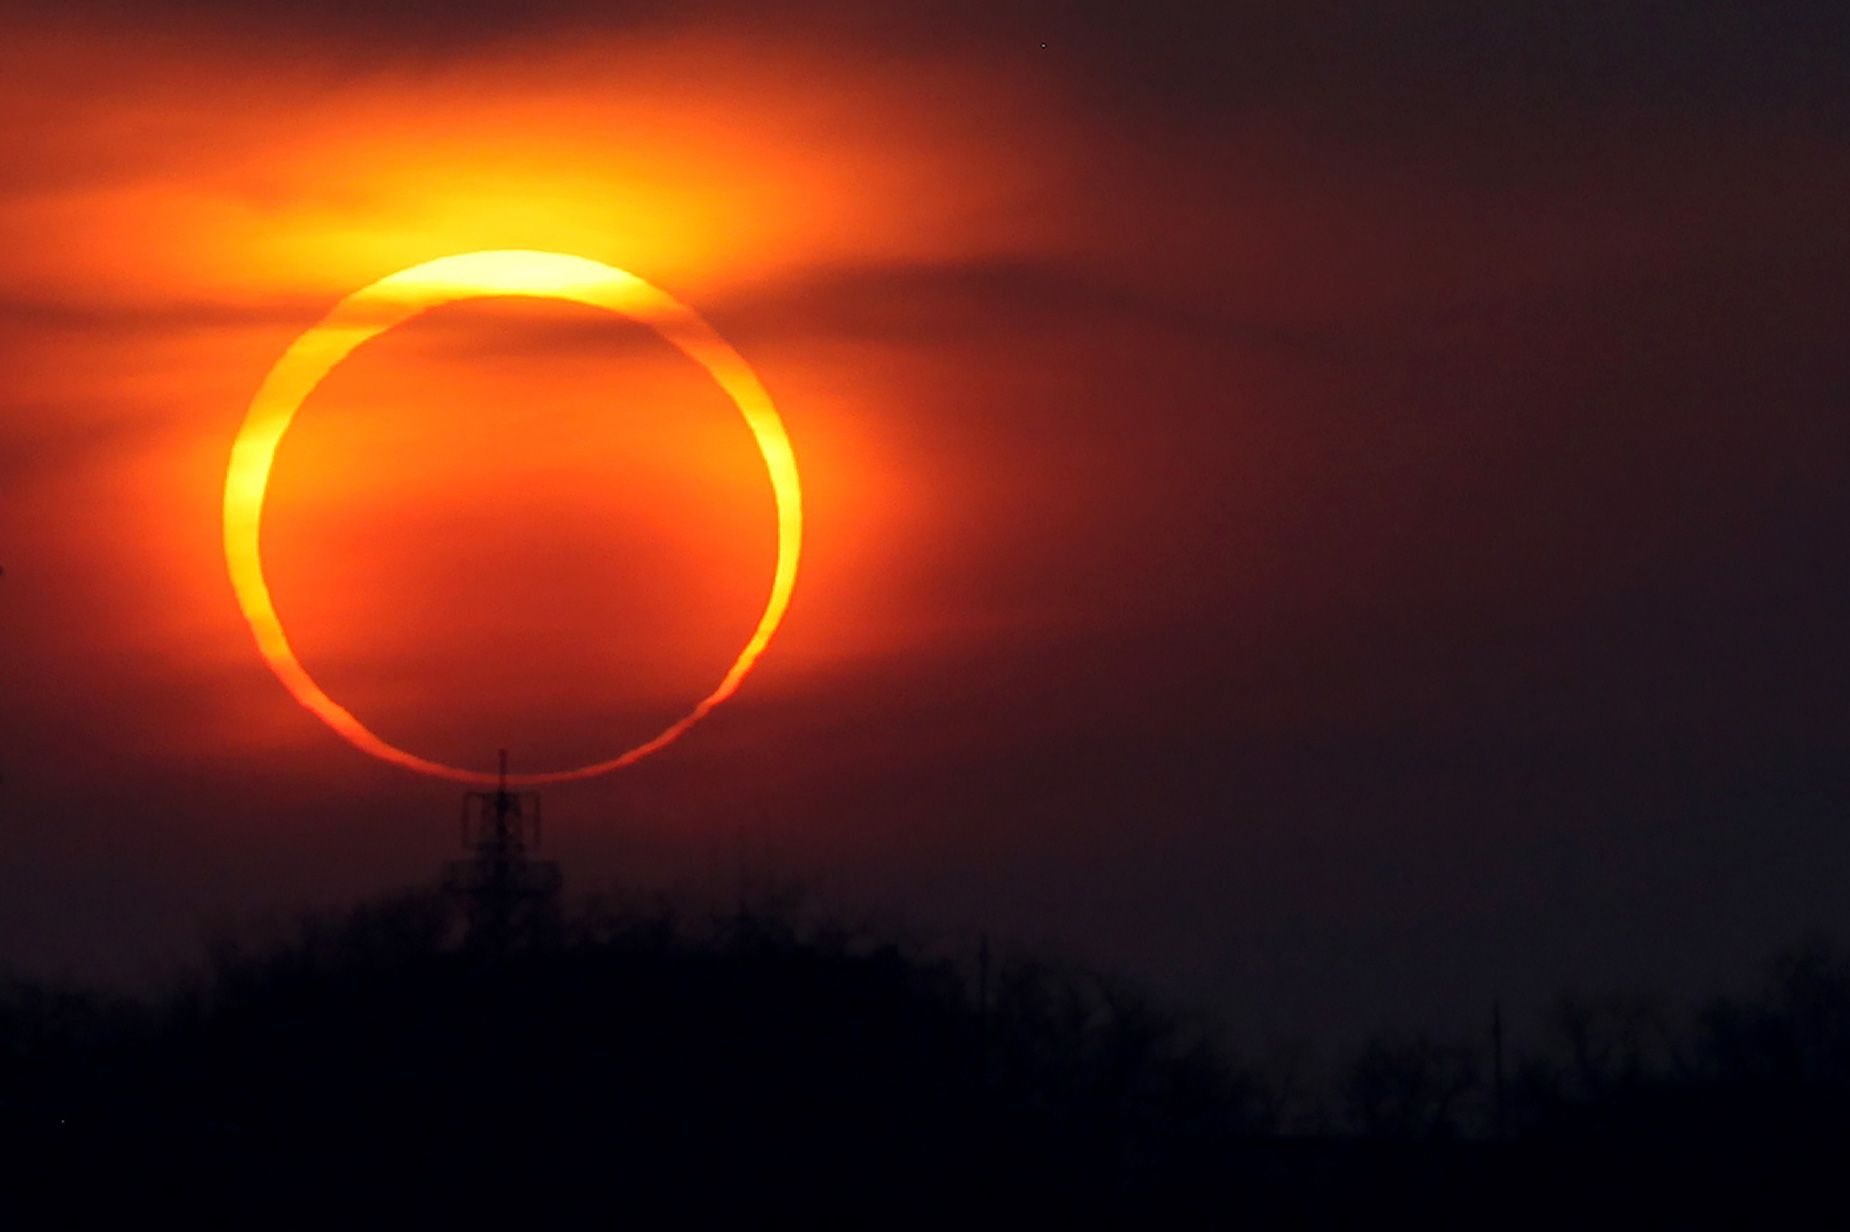 Behold the beauty of an annular solar eclipse. This one occurred on January 15, 2010, in Qingdao in Shandong Province of China.